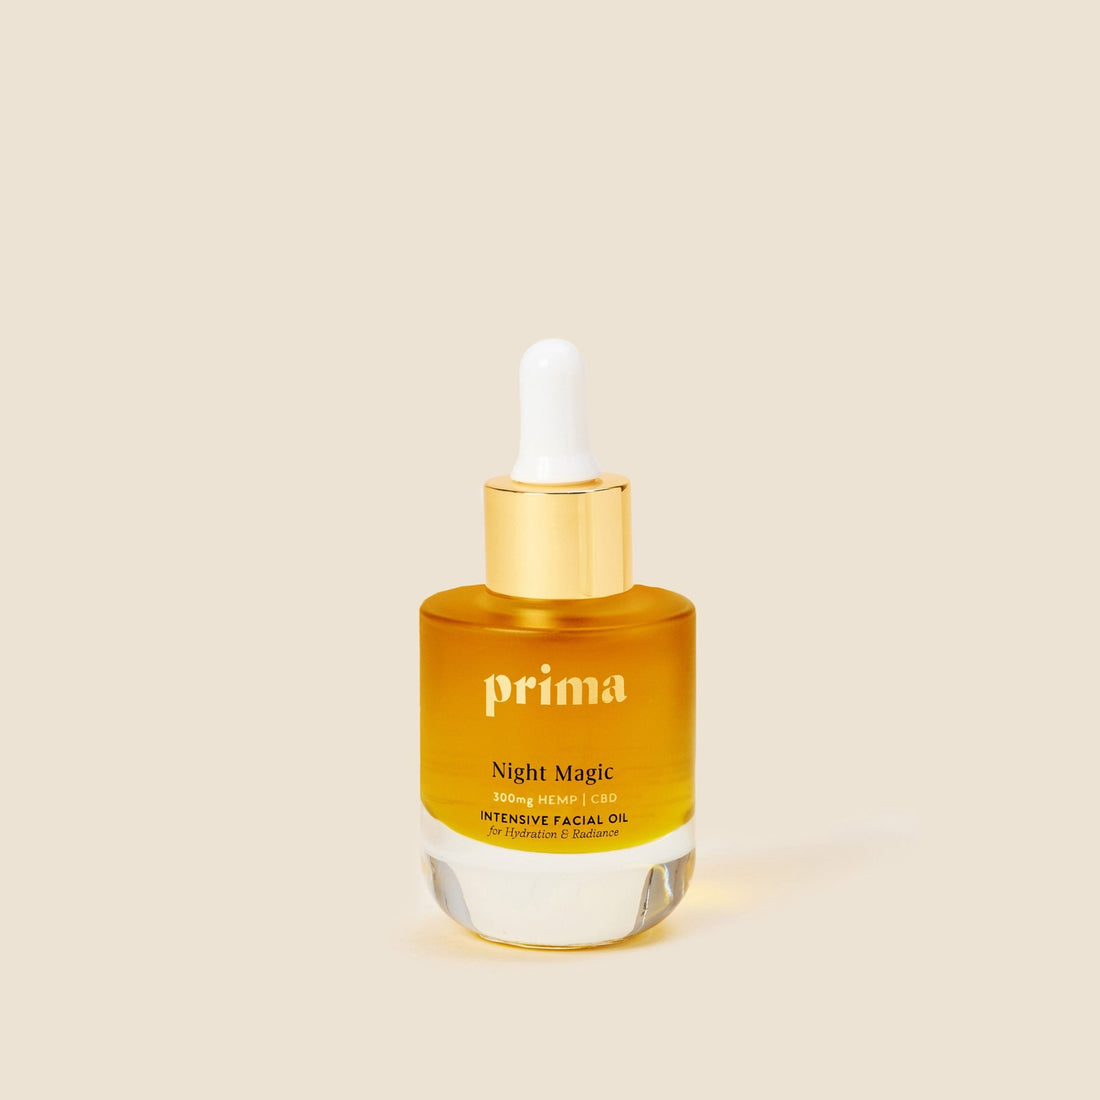 Night Magic | Clinically Proven Facial Oil for Firmer, Glowing Skin - PrimaPrimaproduct_type